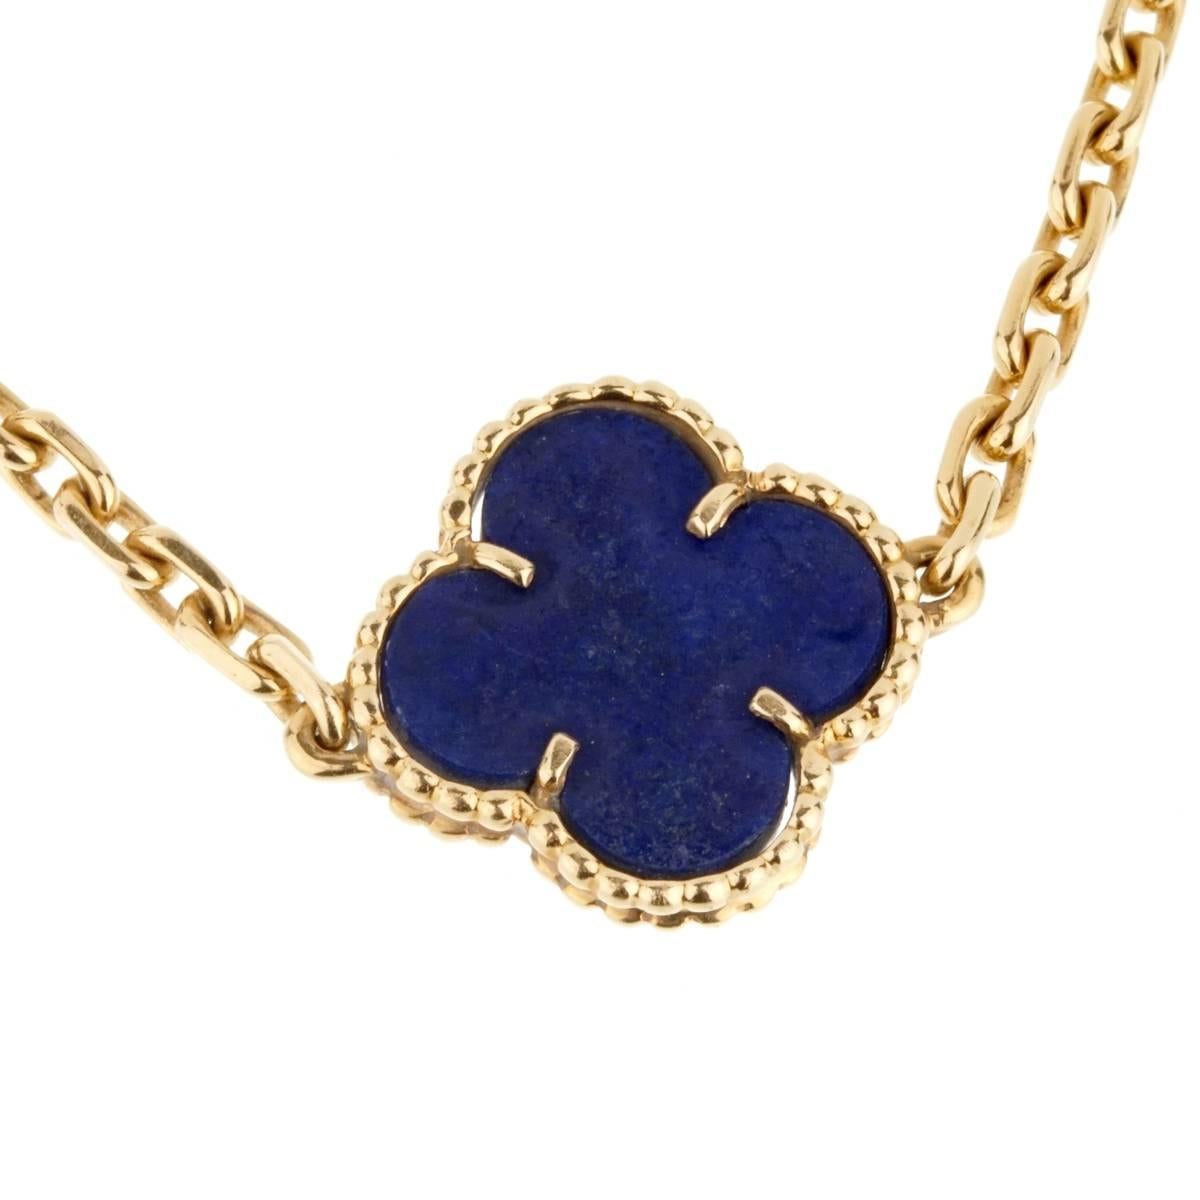 An iconic Van Cleef & Arpels bracelet featuring 1 Vintage Alhambra motif set with a royal blue Lapis Lazuli stone in 18k yellow gold.

The bracelet measures 7